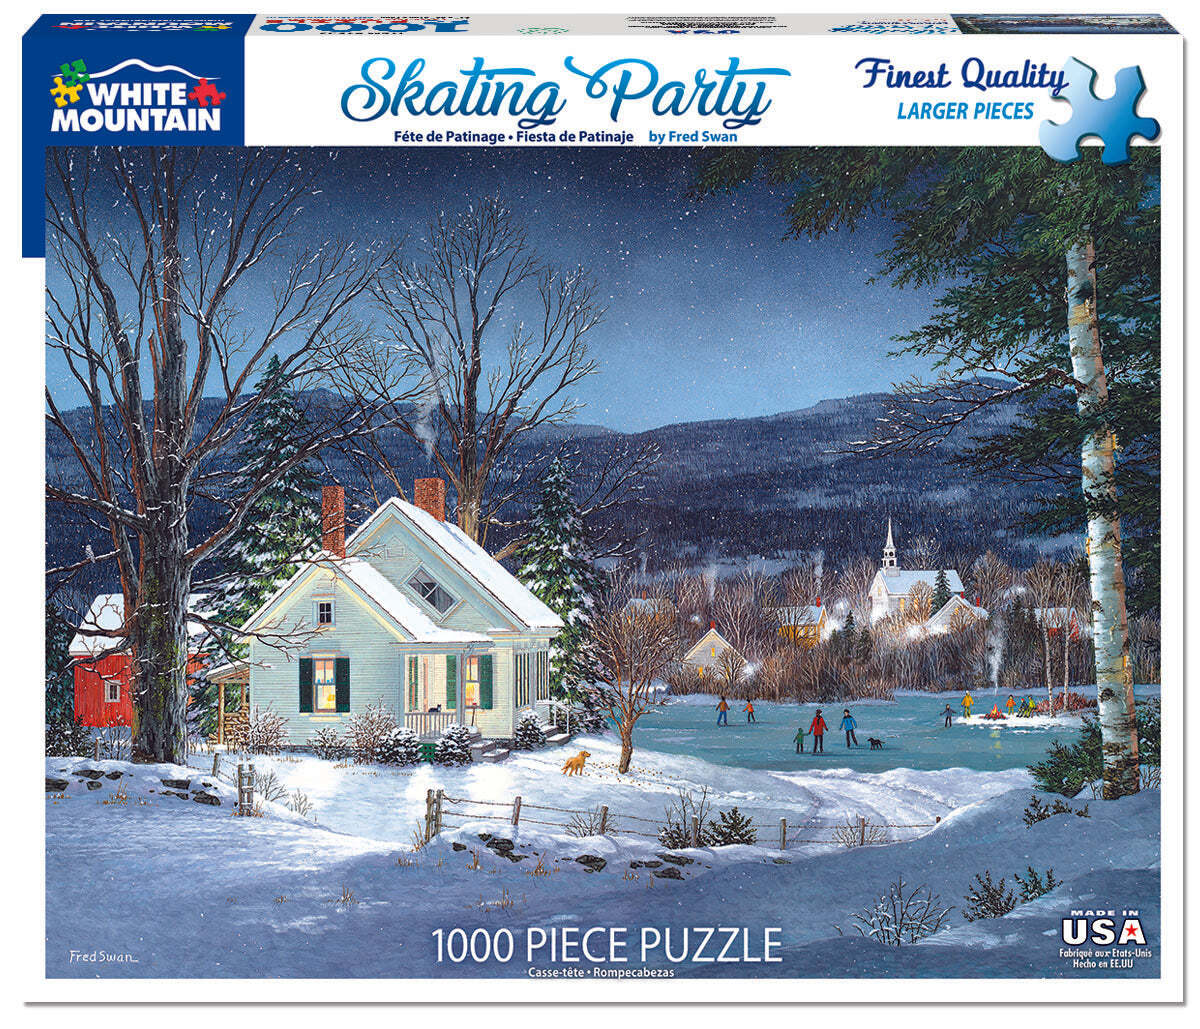 Skating Party (1523pz) - 1000 Piece Jigsaw Puzzle